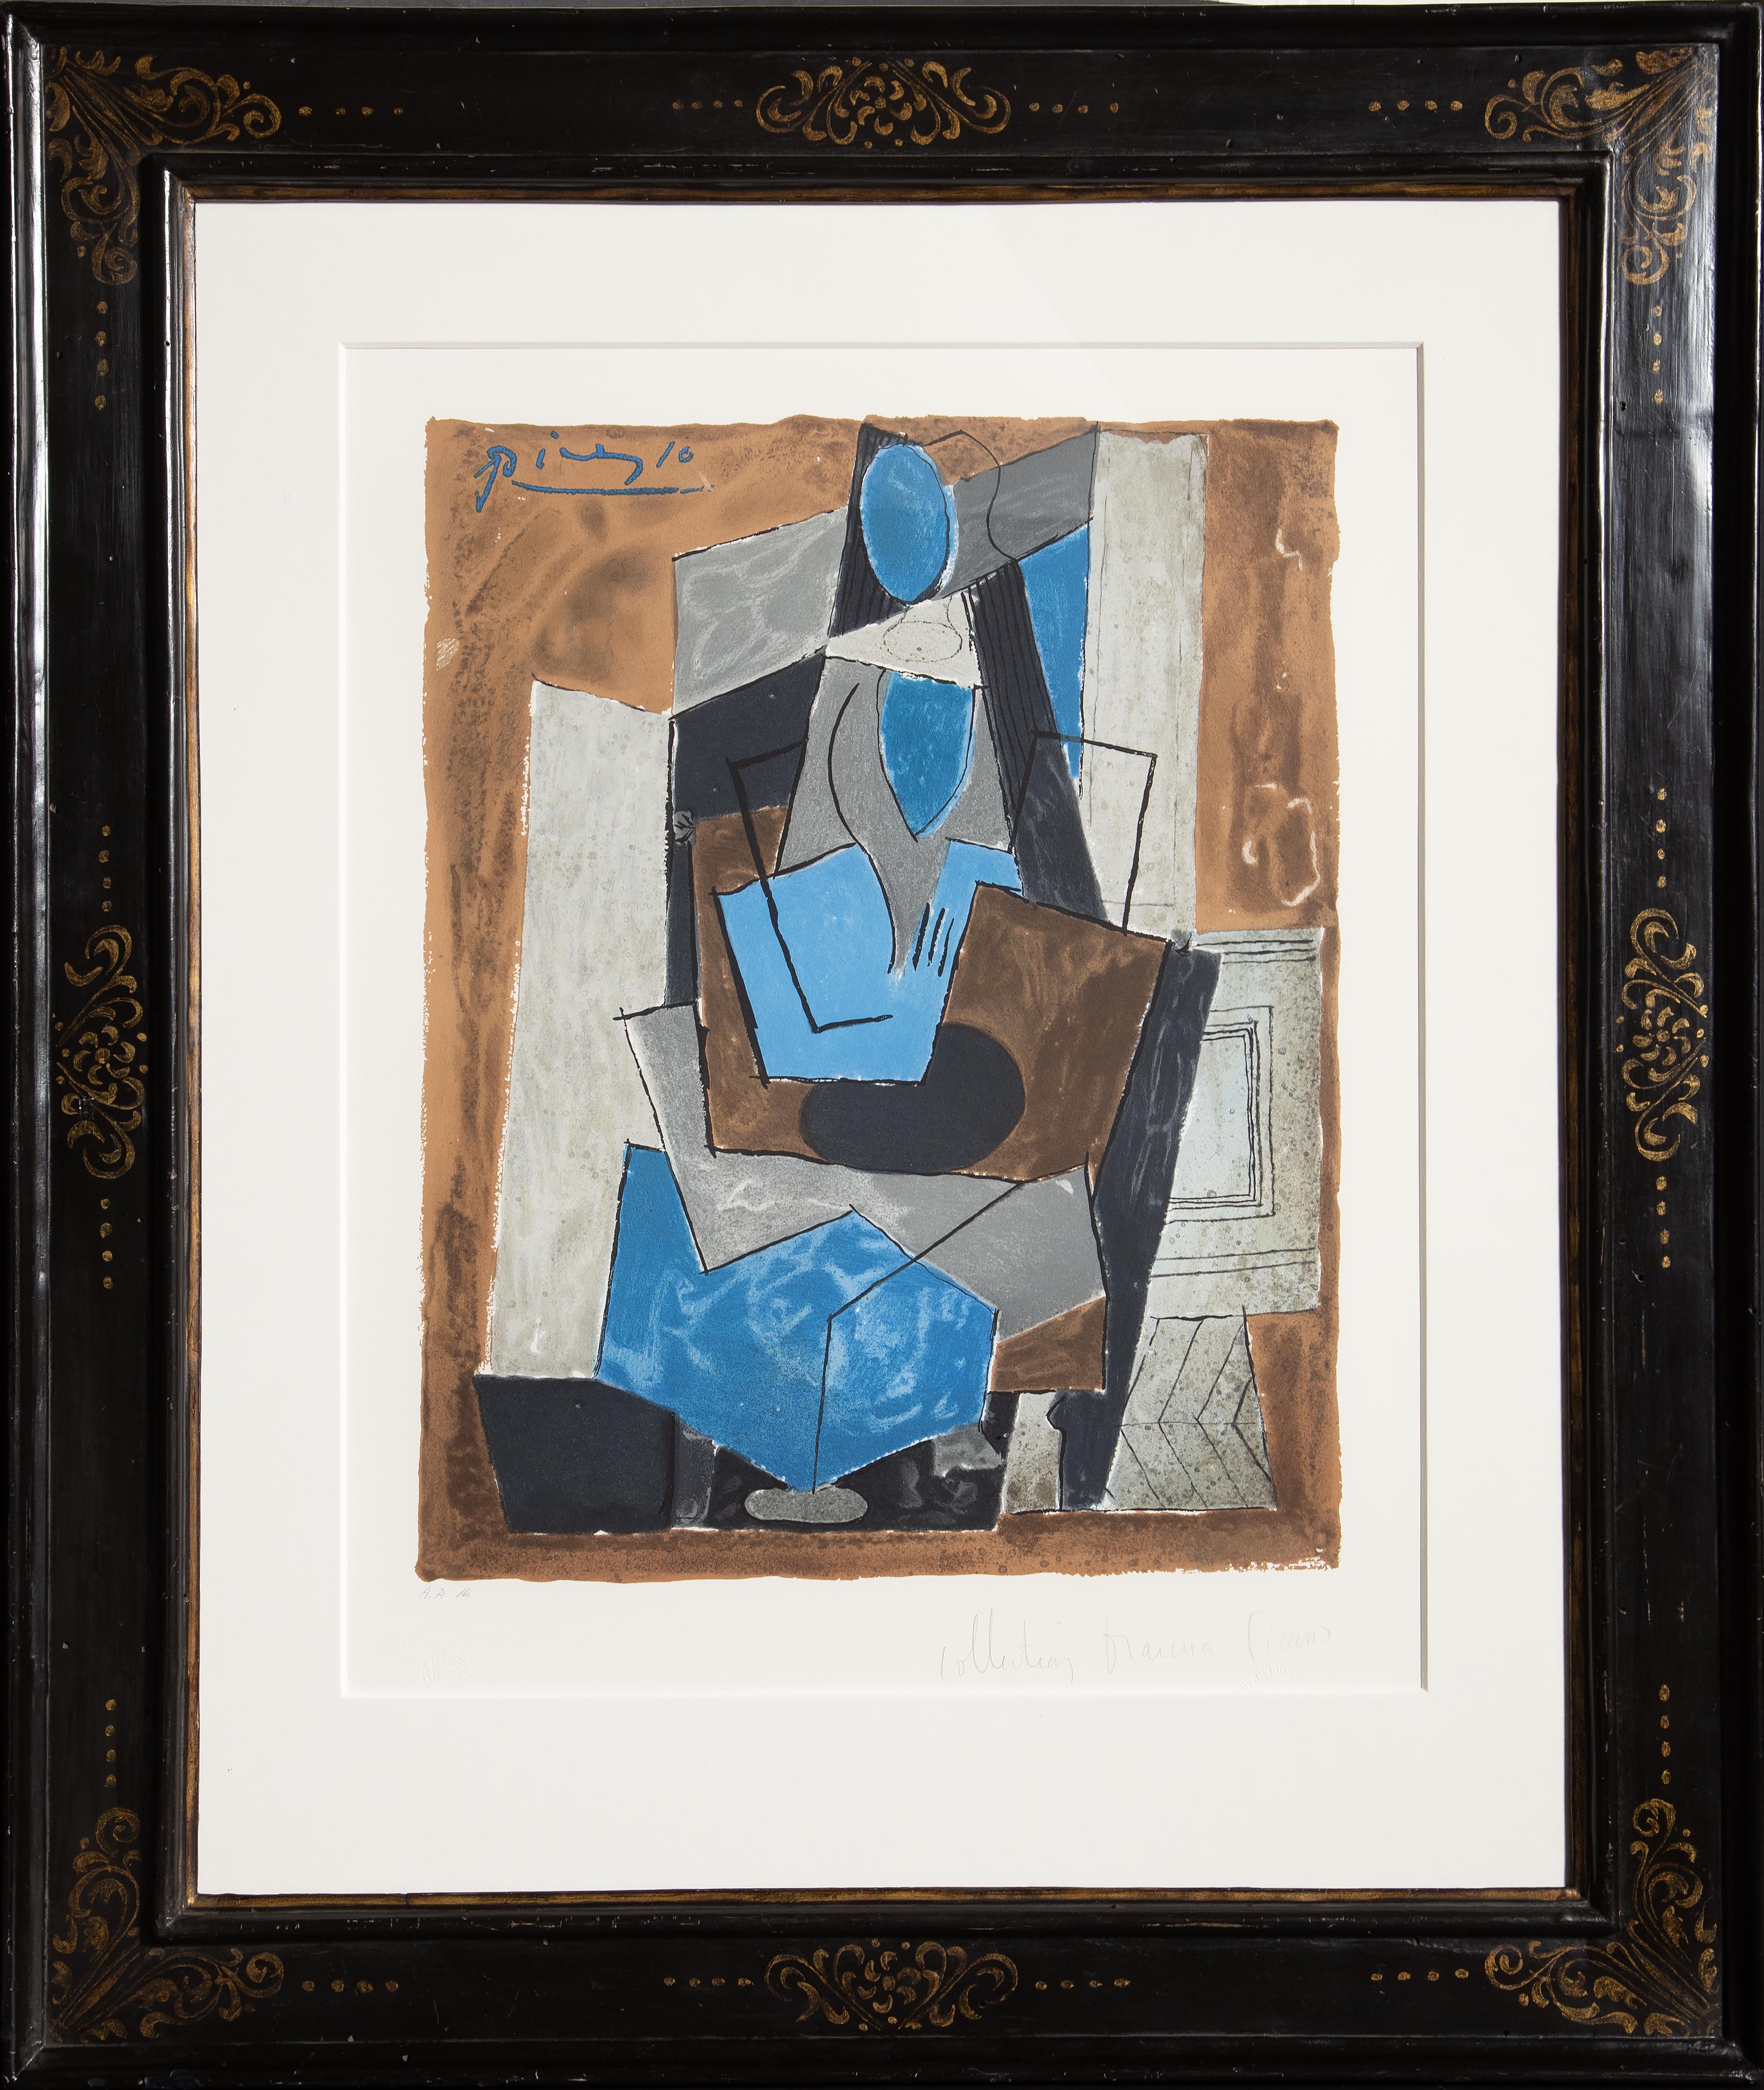 Reduced to angular shapes, the female model in this Pablo Picasso print is portrayed in the Cubist style founded and propagated by the artist himself. Relying on invented perspective, the artist refutes realistic perspective and instead combines